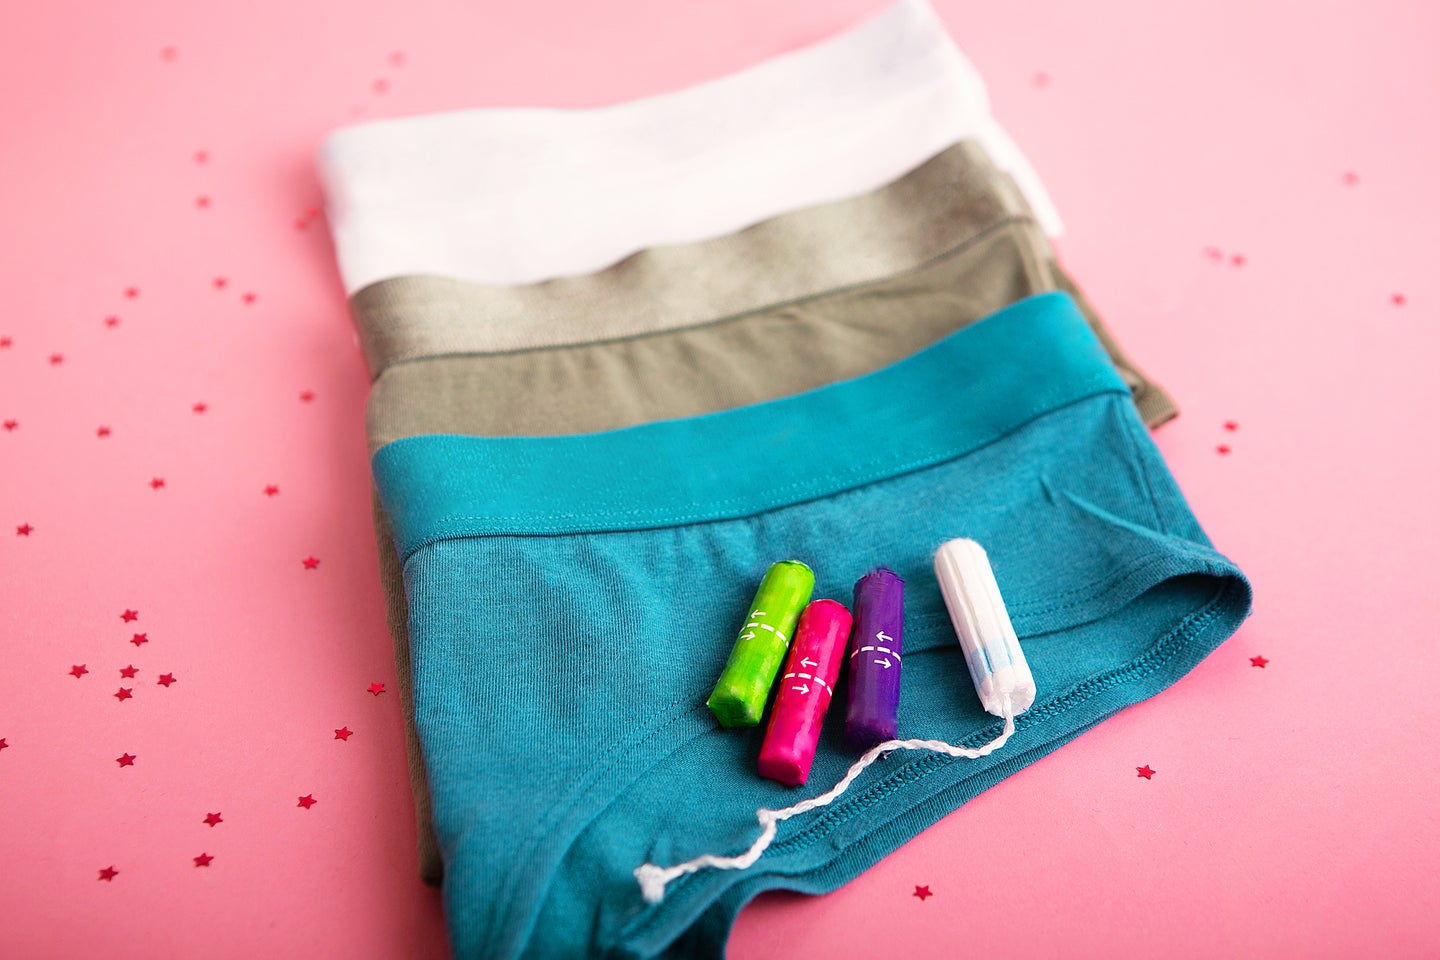 underwear and tampons on a pink background